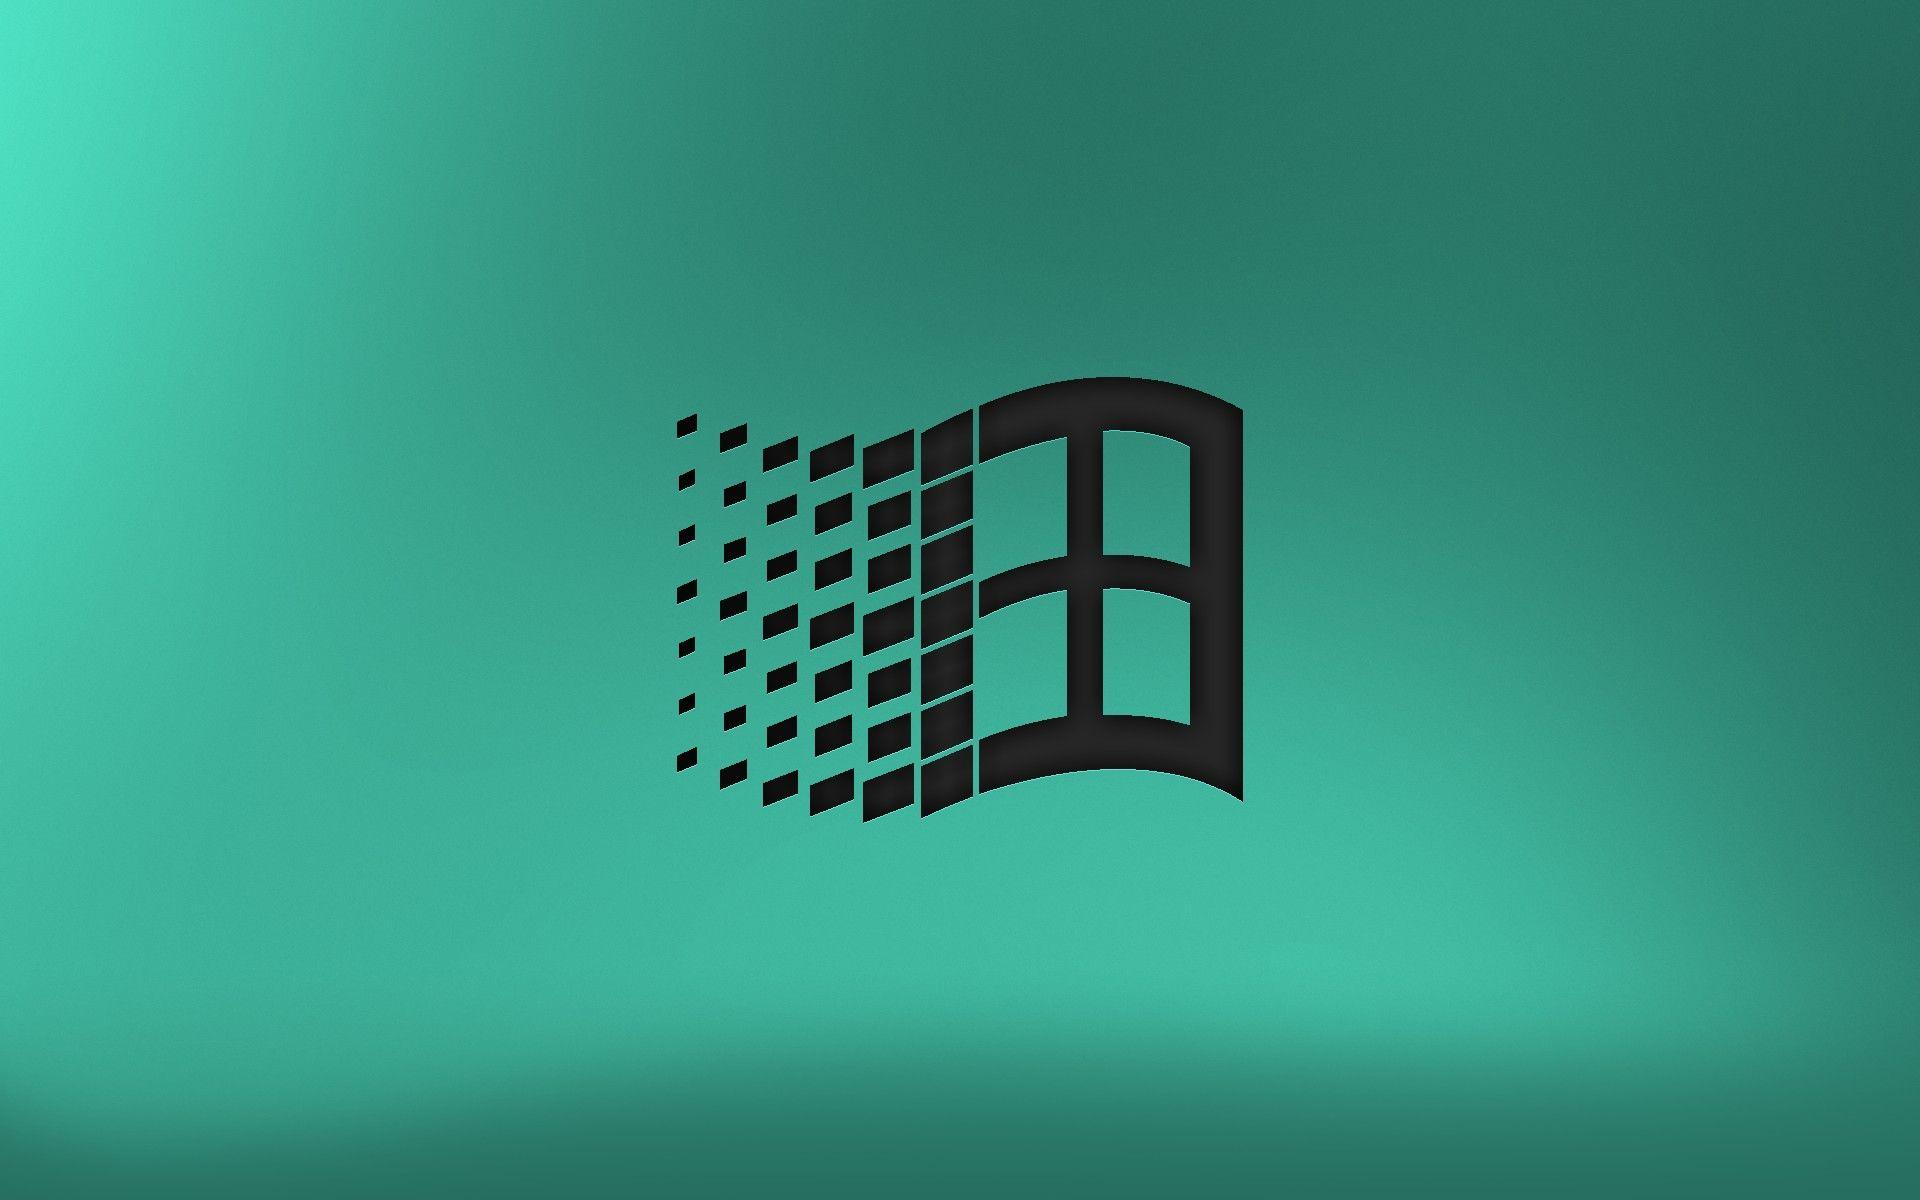 Windows 95 backgroundDownload free full HD background